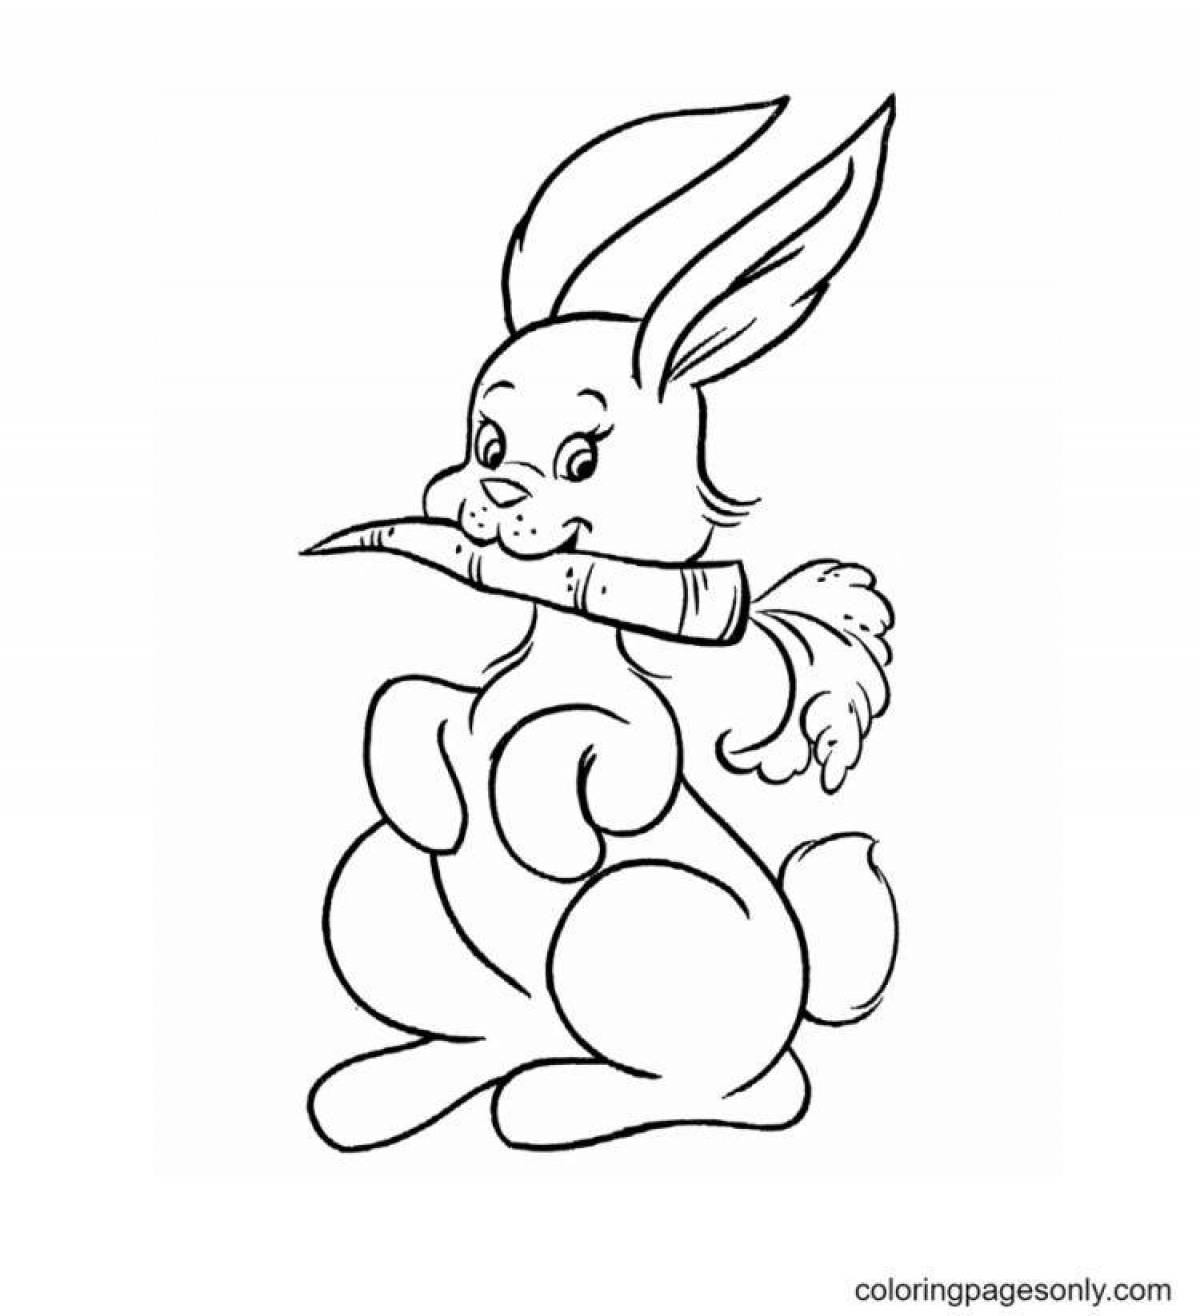 Cute bunny coloring book with carrots